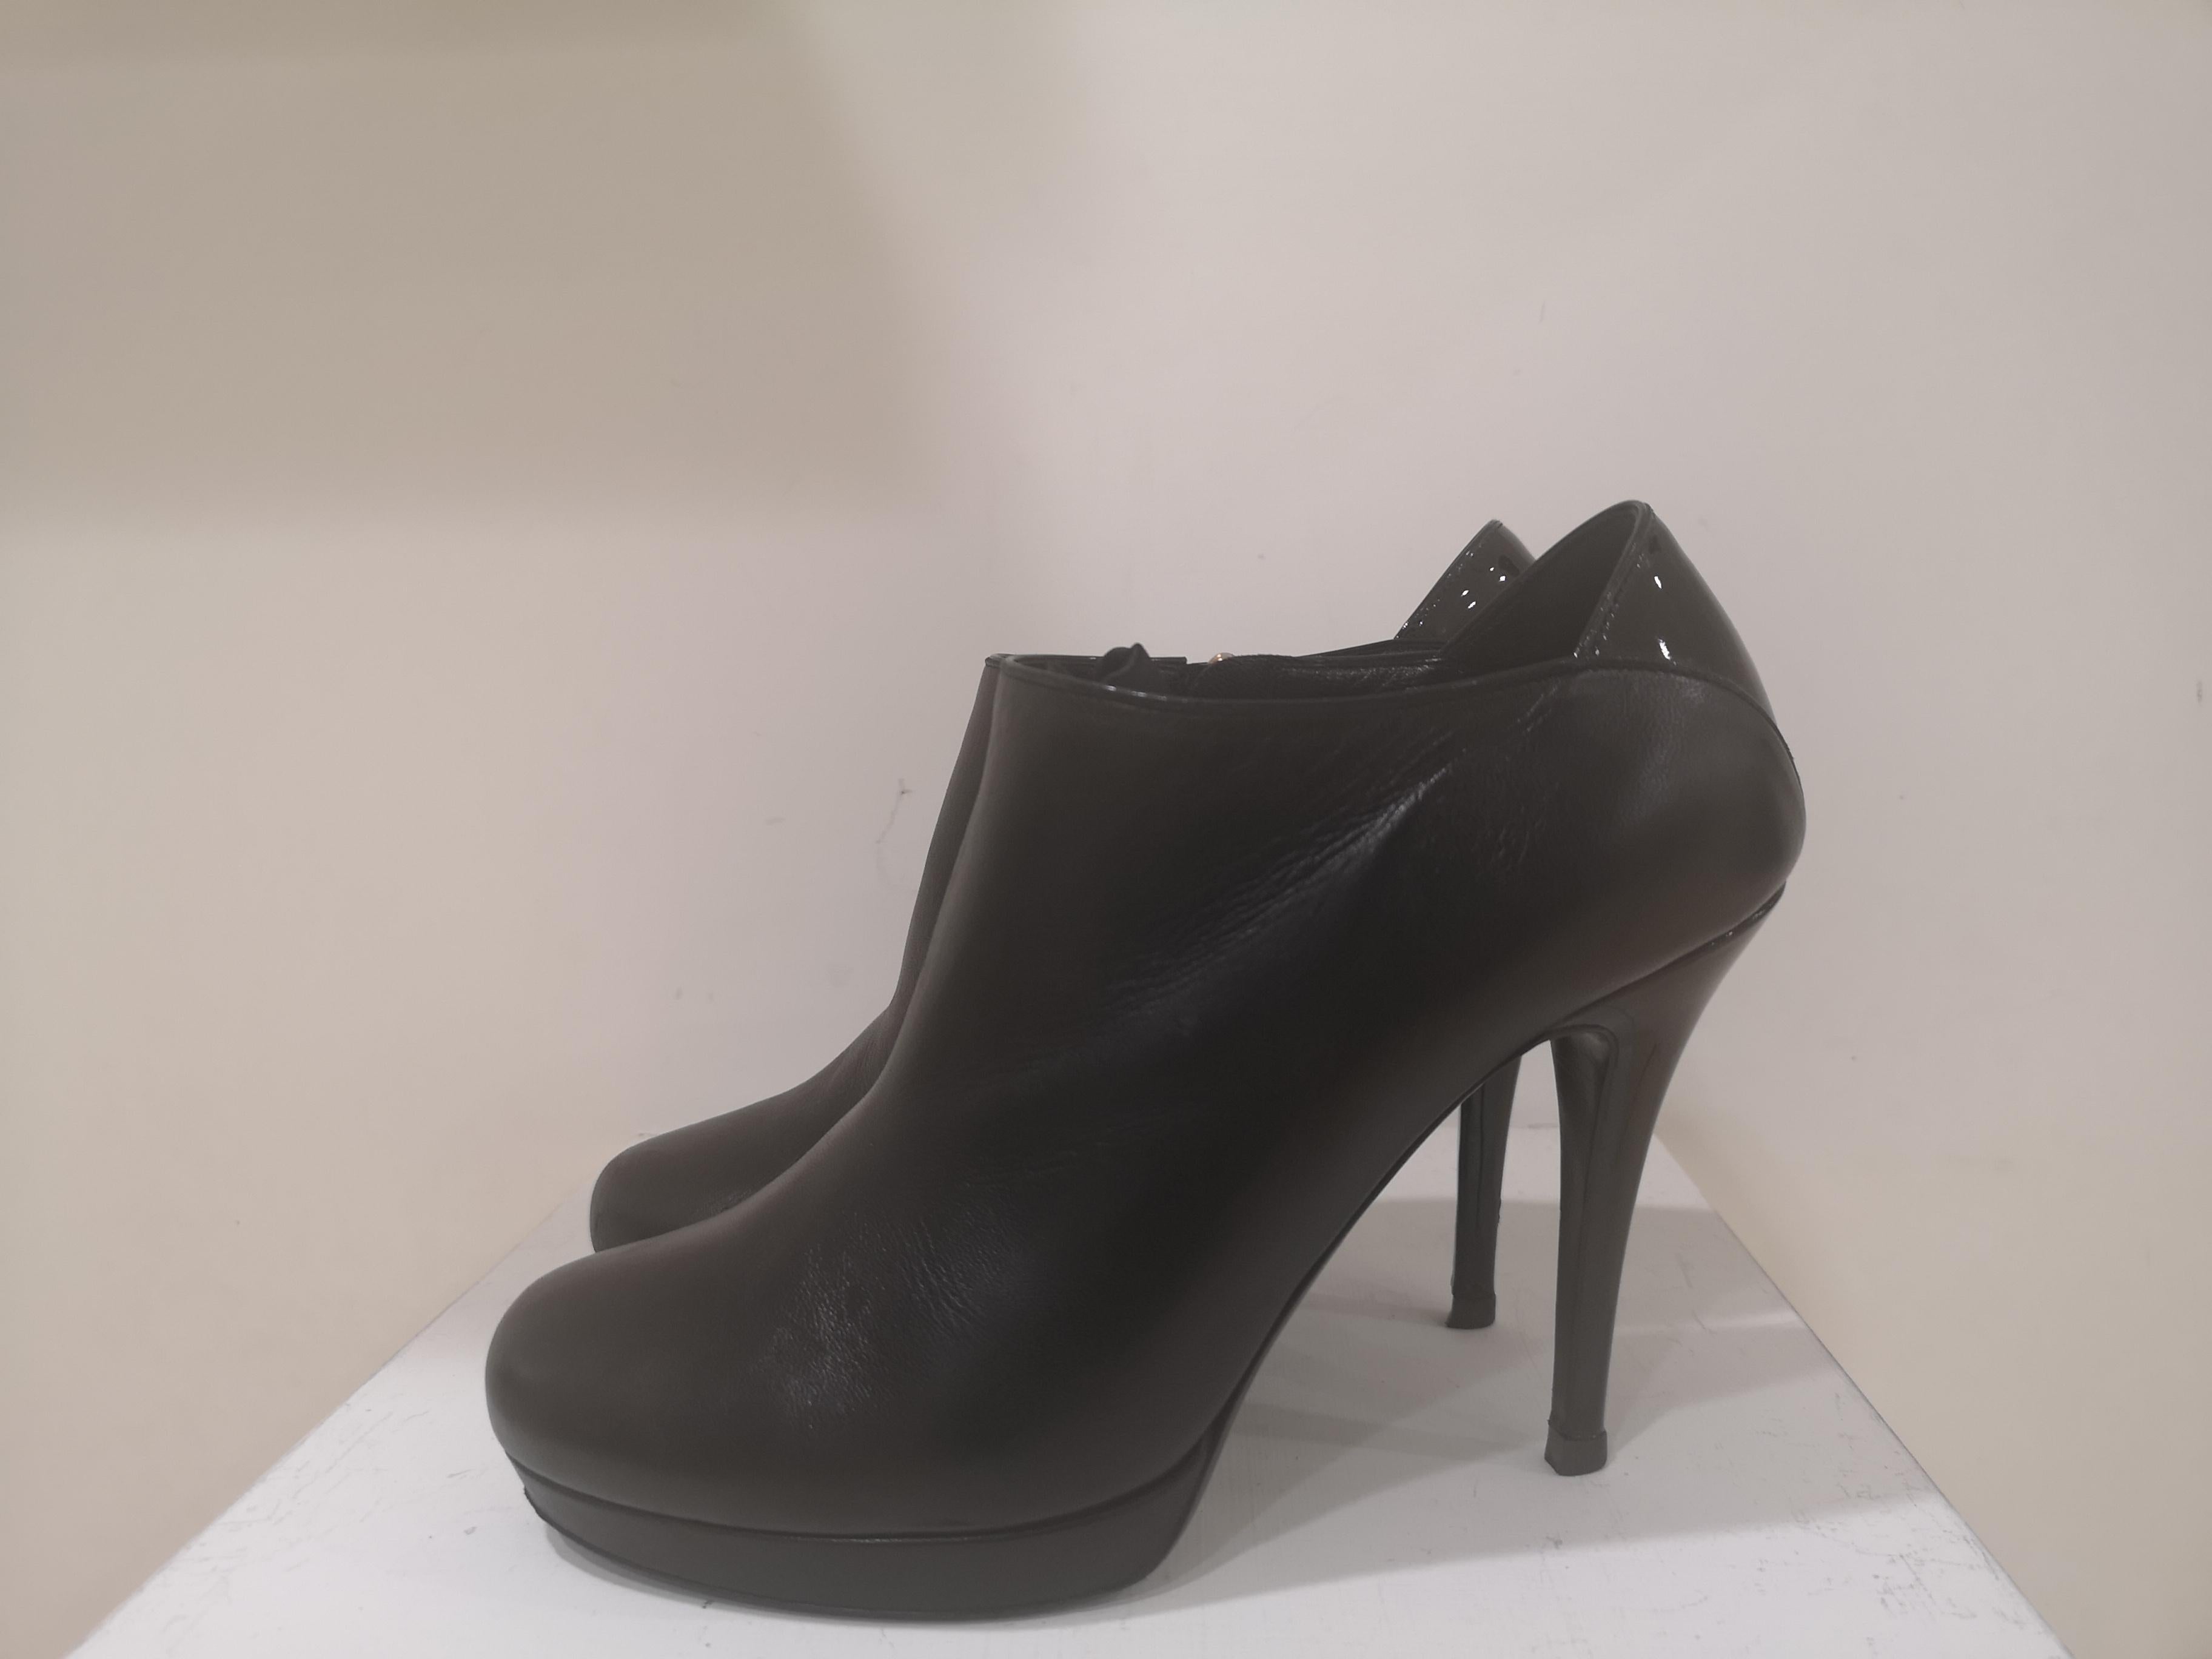 Yves Saint Laurent Black Shoes In Good Condition For Sale In Capri, IT